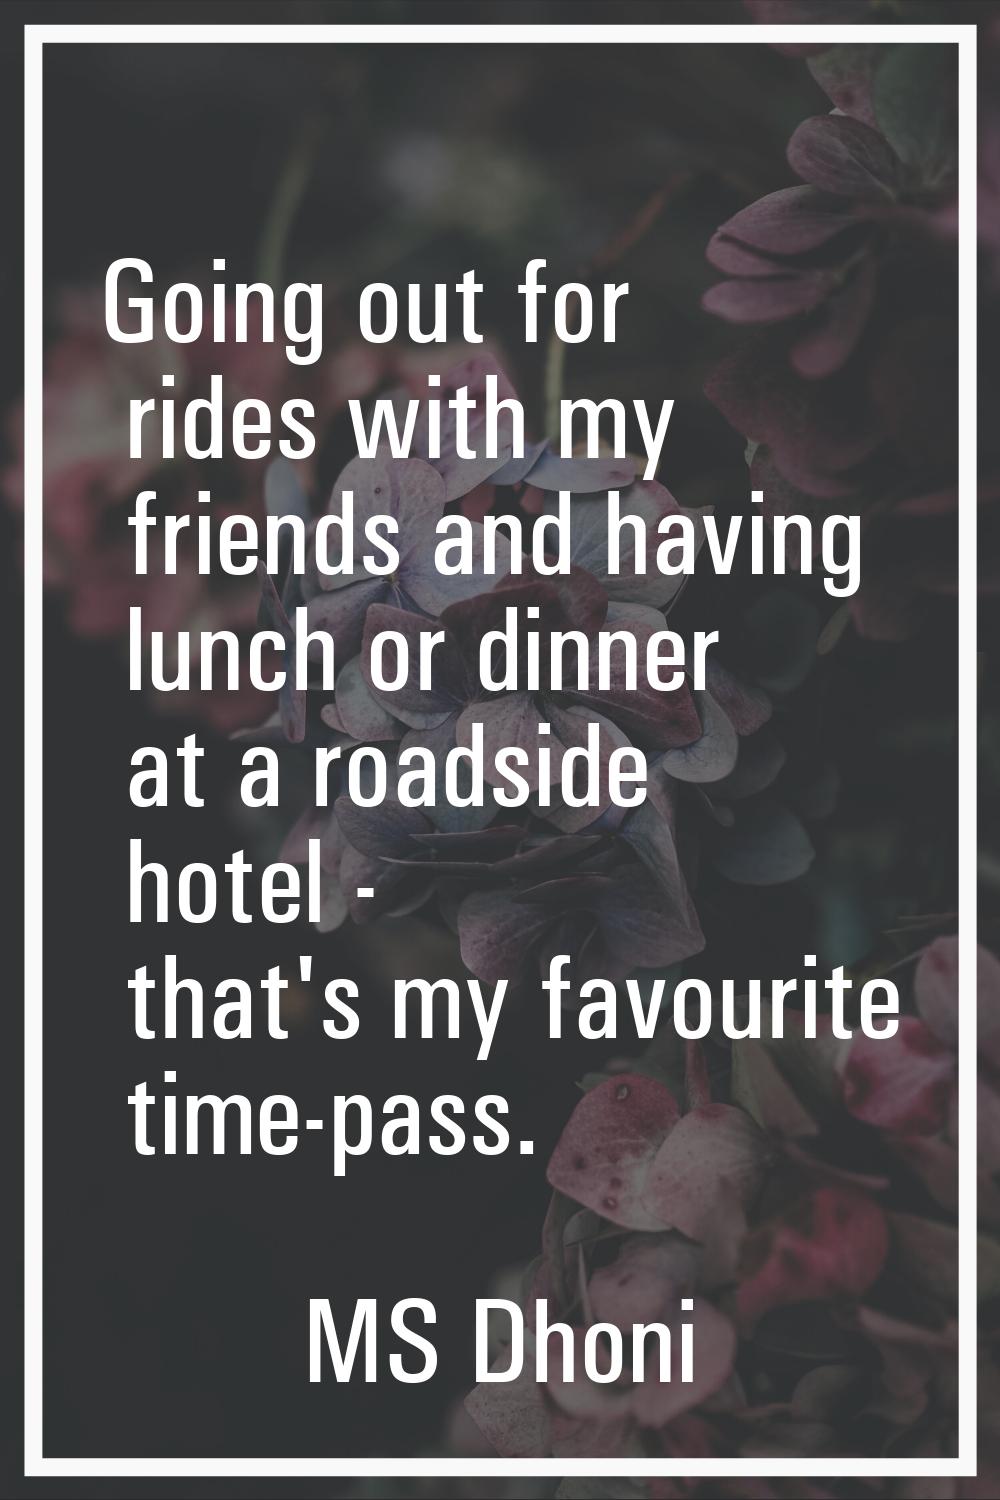 Going out for rides with my friends and having lunch or dinner at a roadside hotel - that's my favo